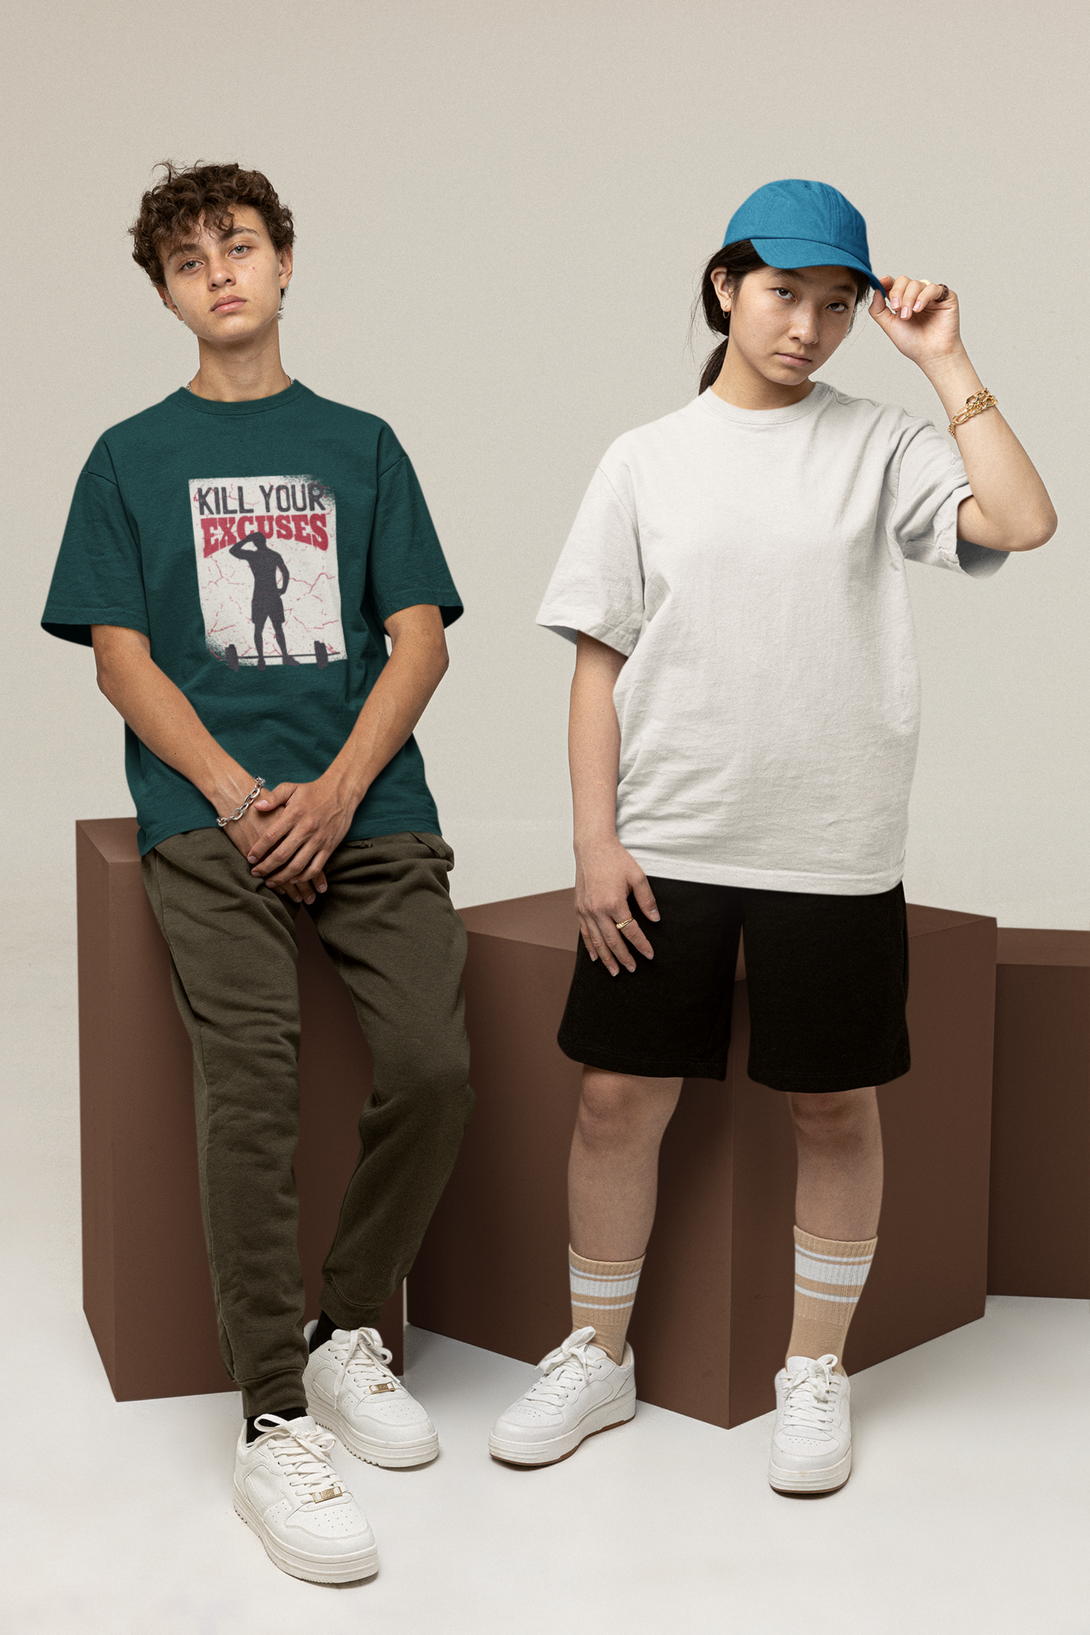 Kill Your Excuses Printed Oversized T-Shirt For Men - WowWaves - 3